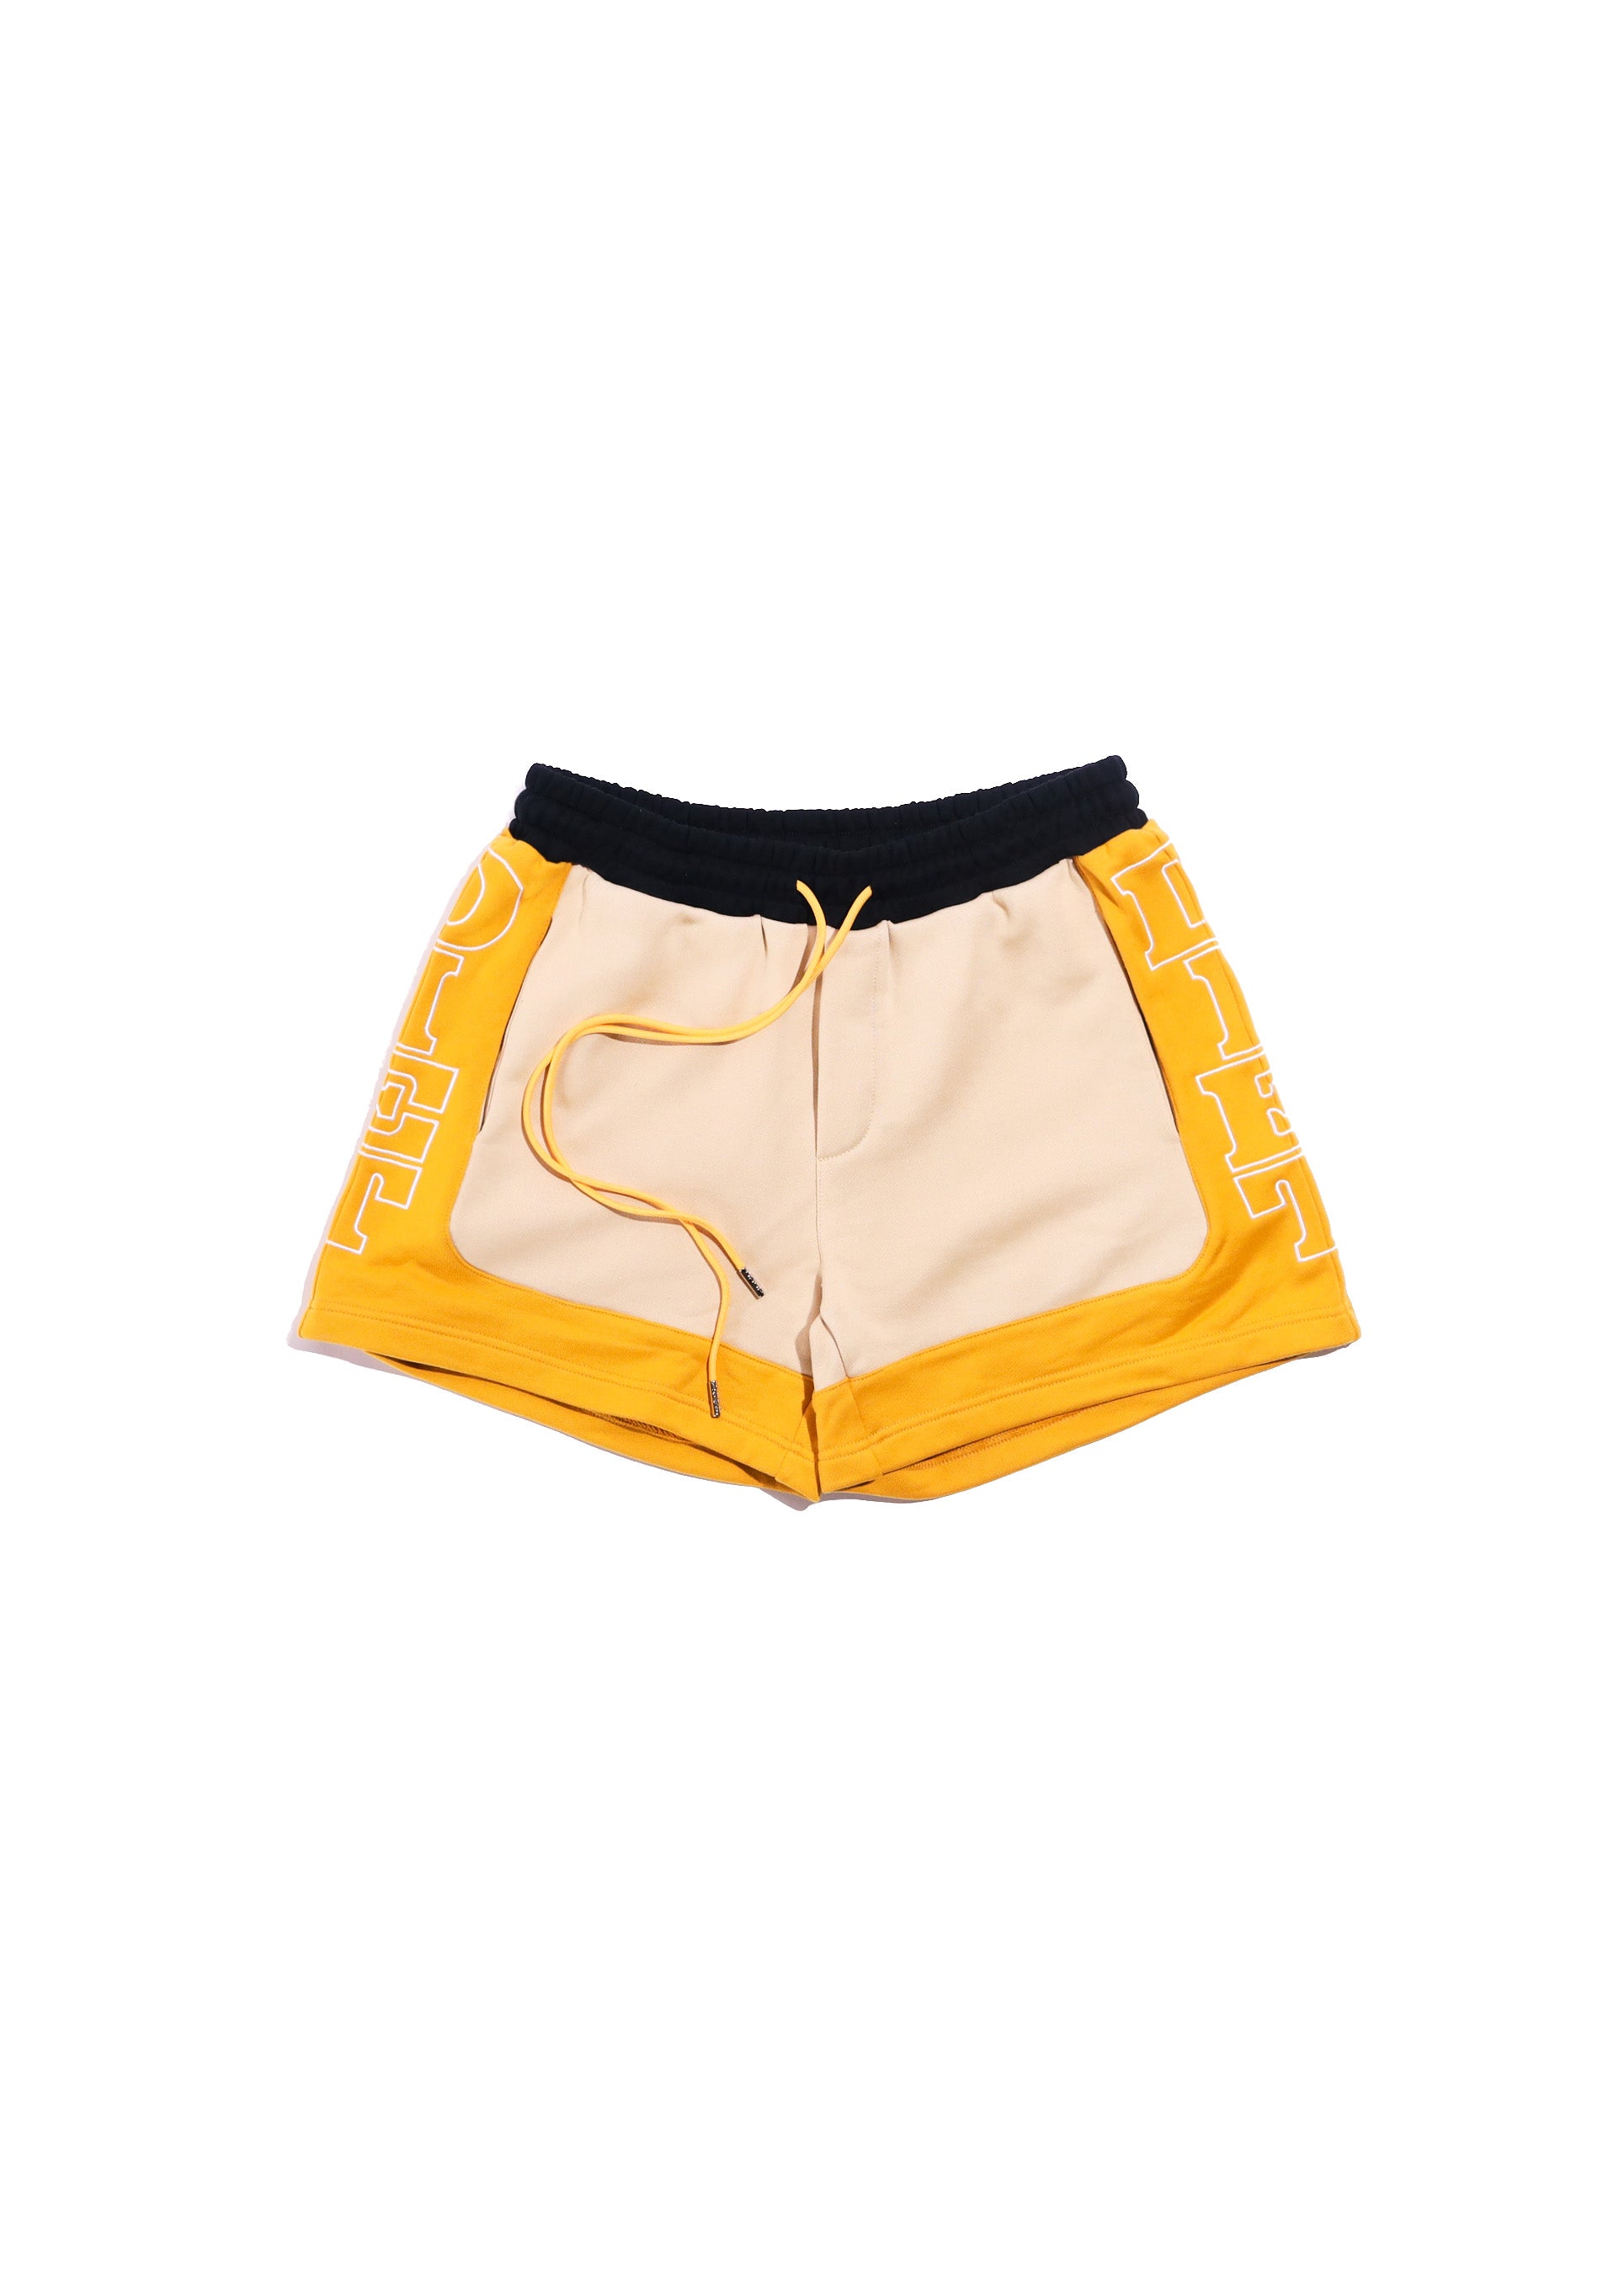 French Terry Row Shorts - Tan/Yellow